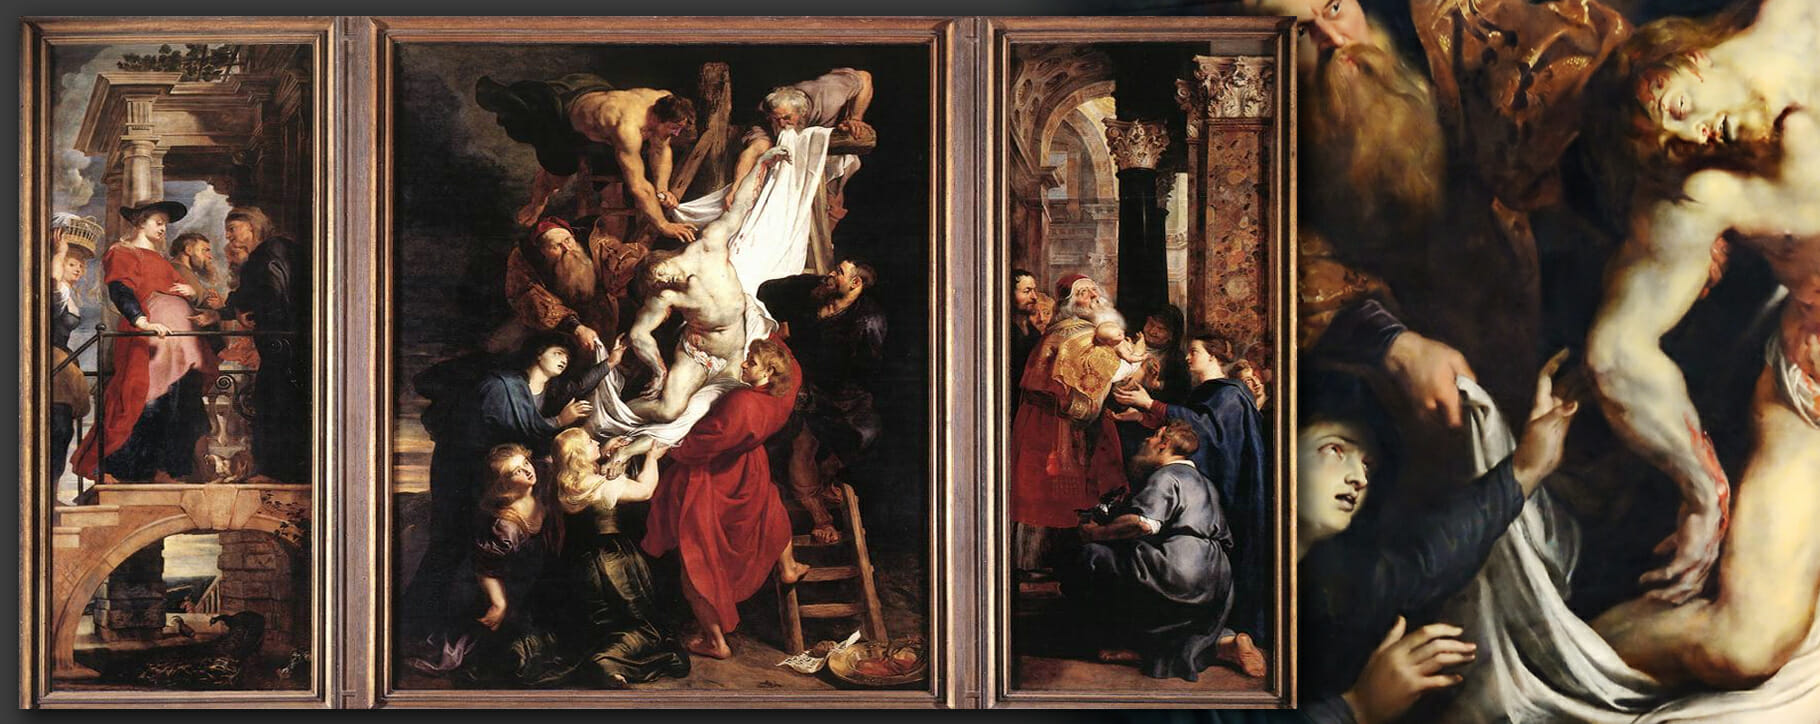 Descent from the cross rubens altarpiece painting